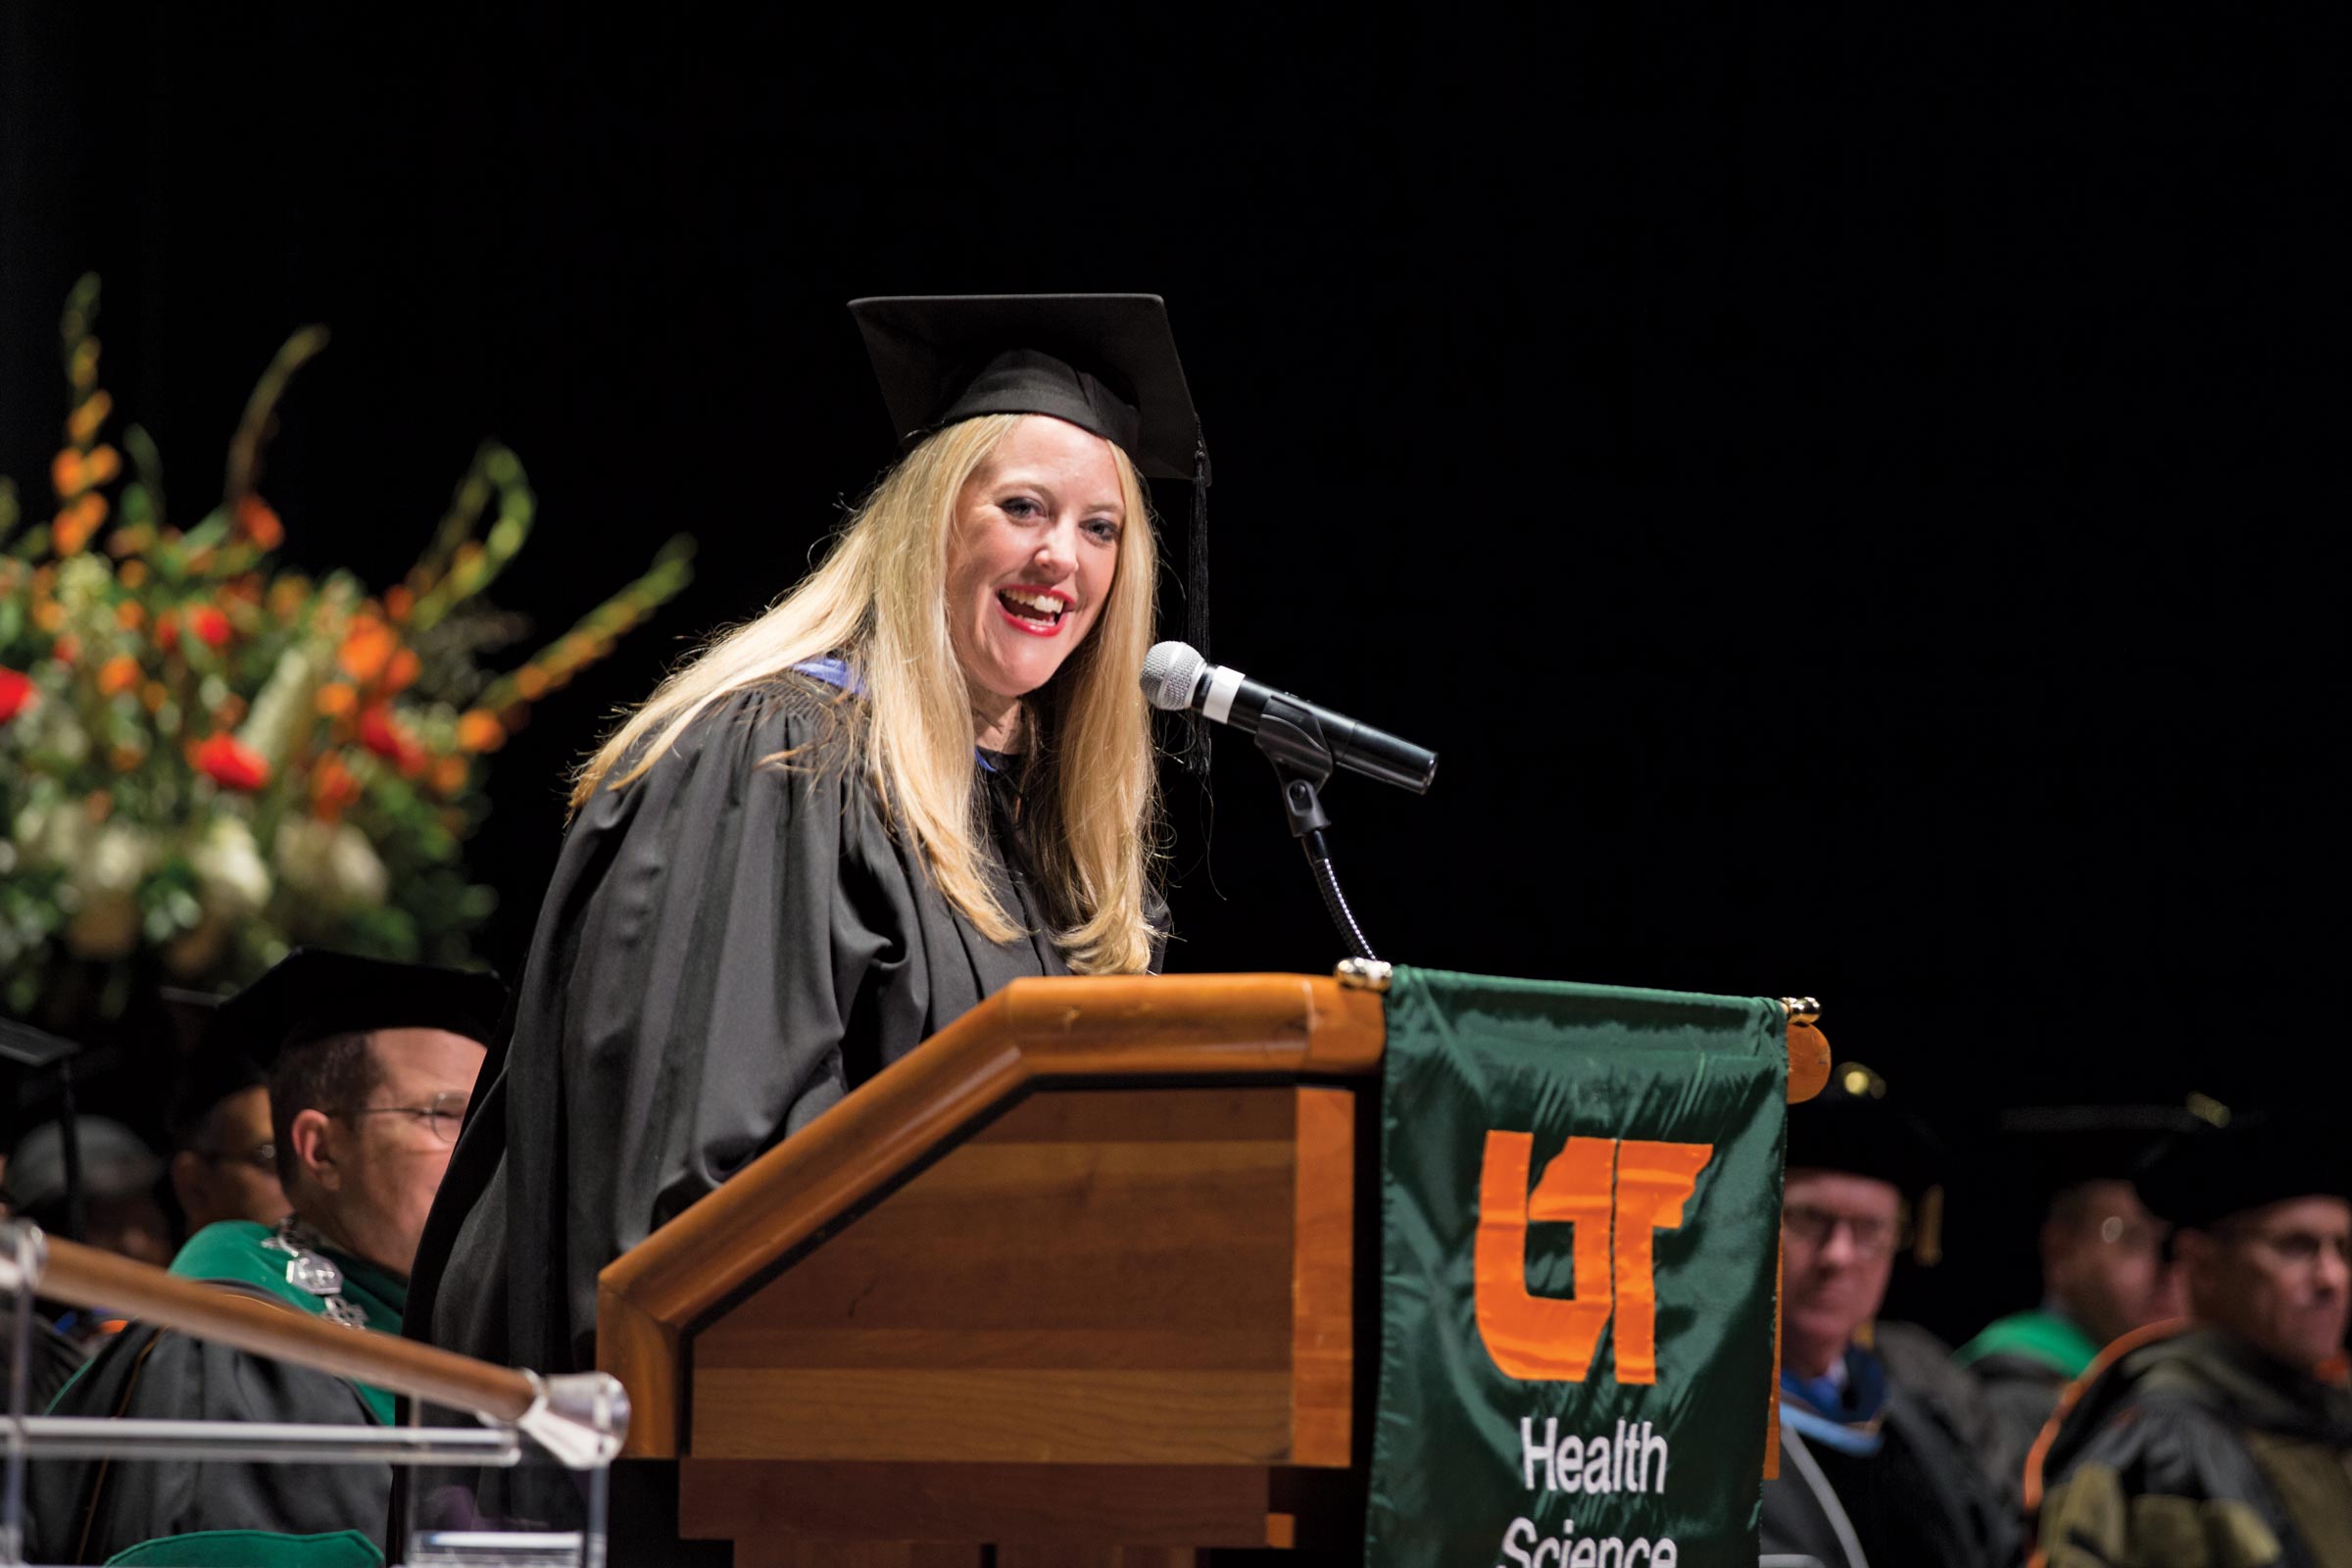 Betsy Brasher Melby wearing black robe and mortarboard cap speaks at commencement podium